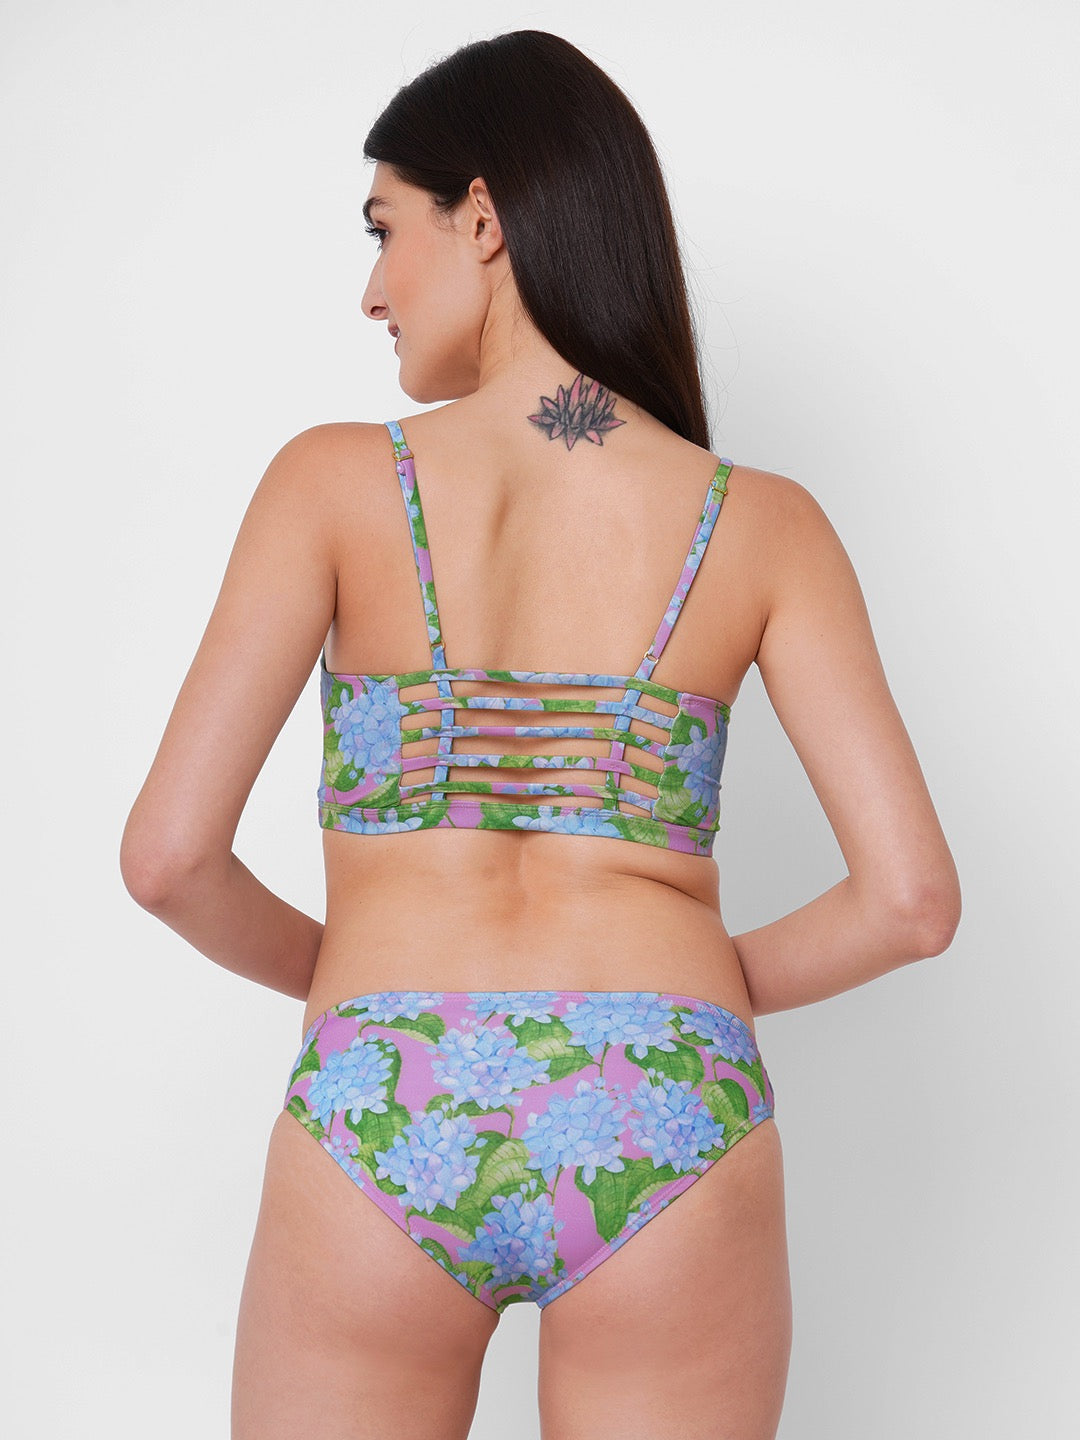 woman is wearing a two piece bikini set with a blue hydrangea print on a pink background